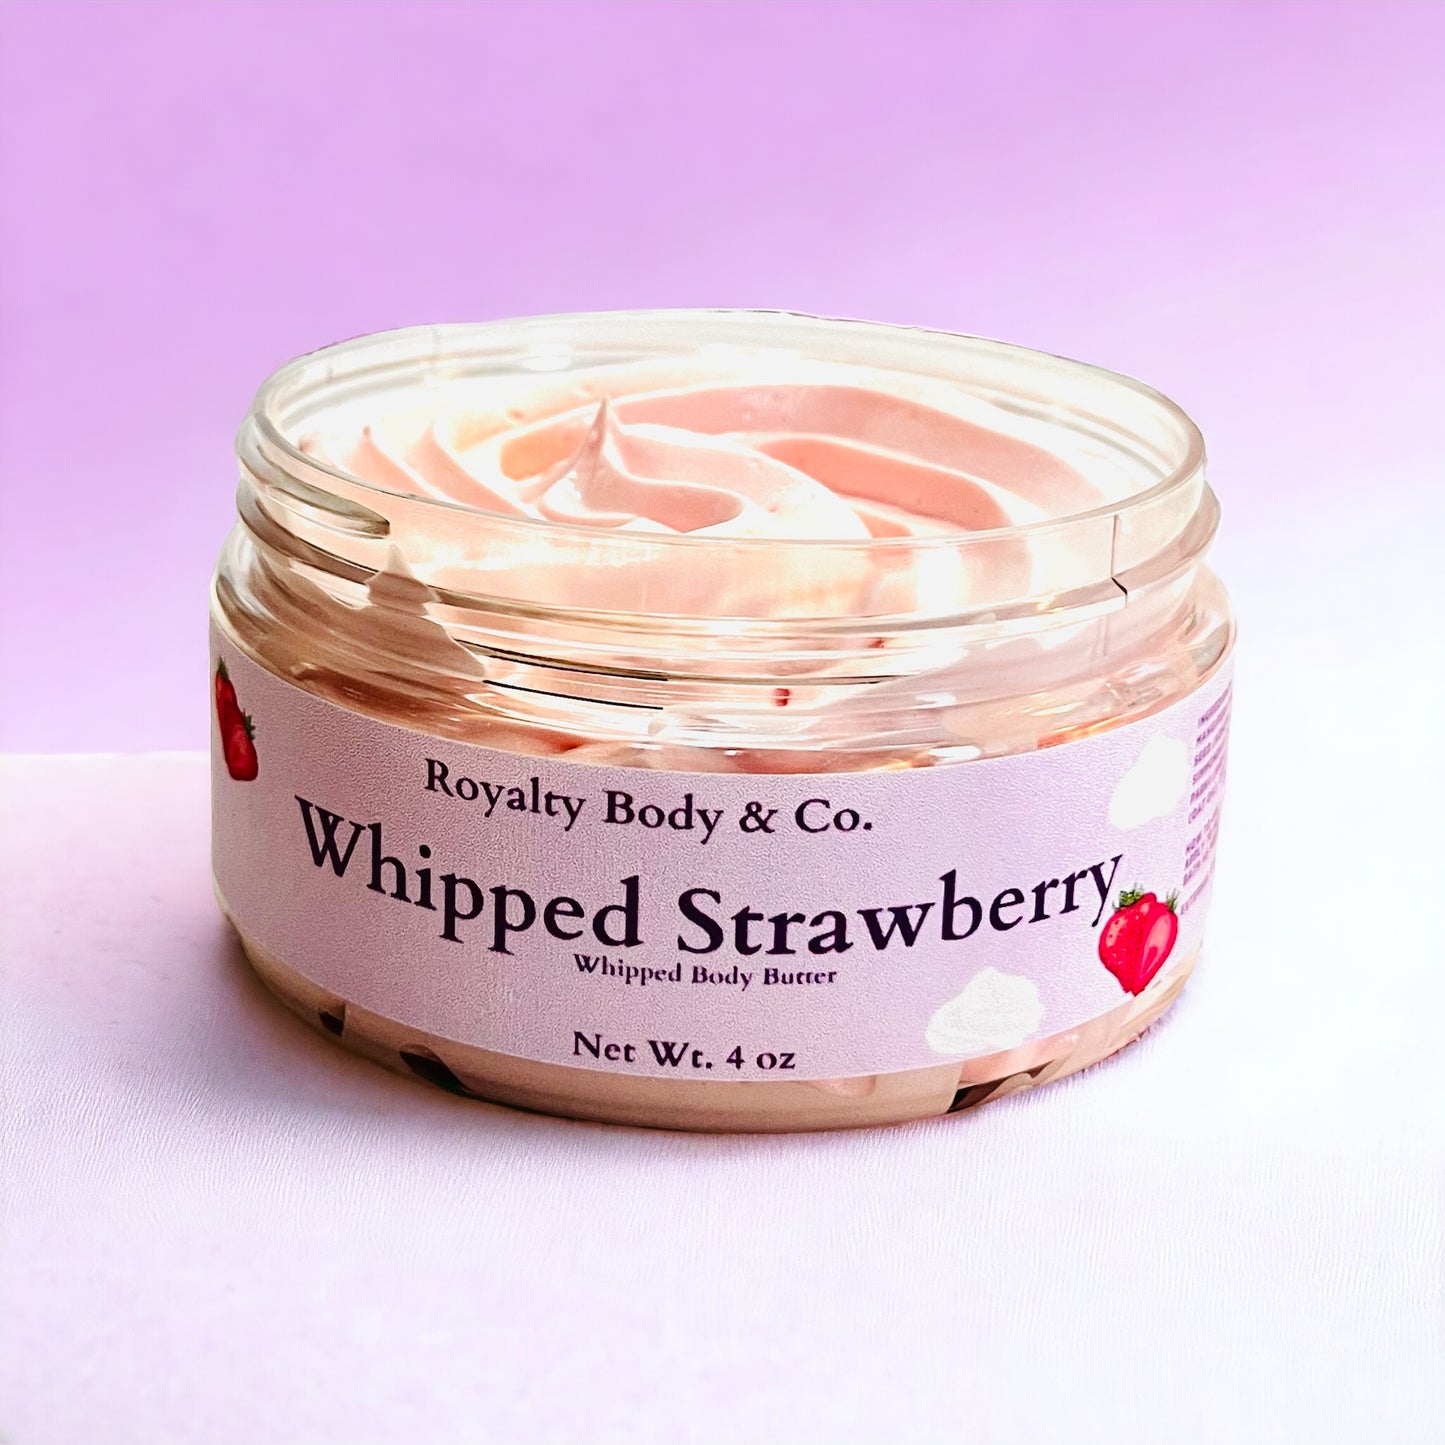 Whipped Strawberry Body Butter